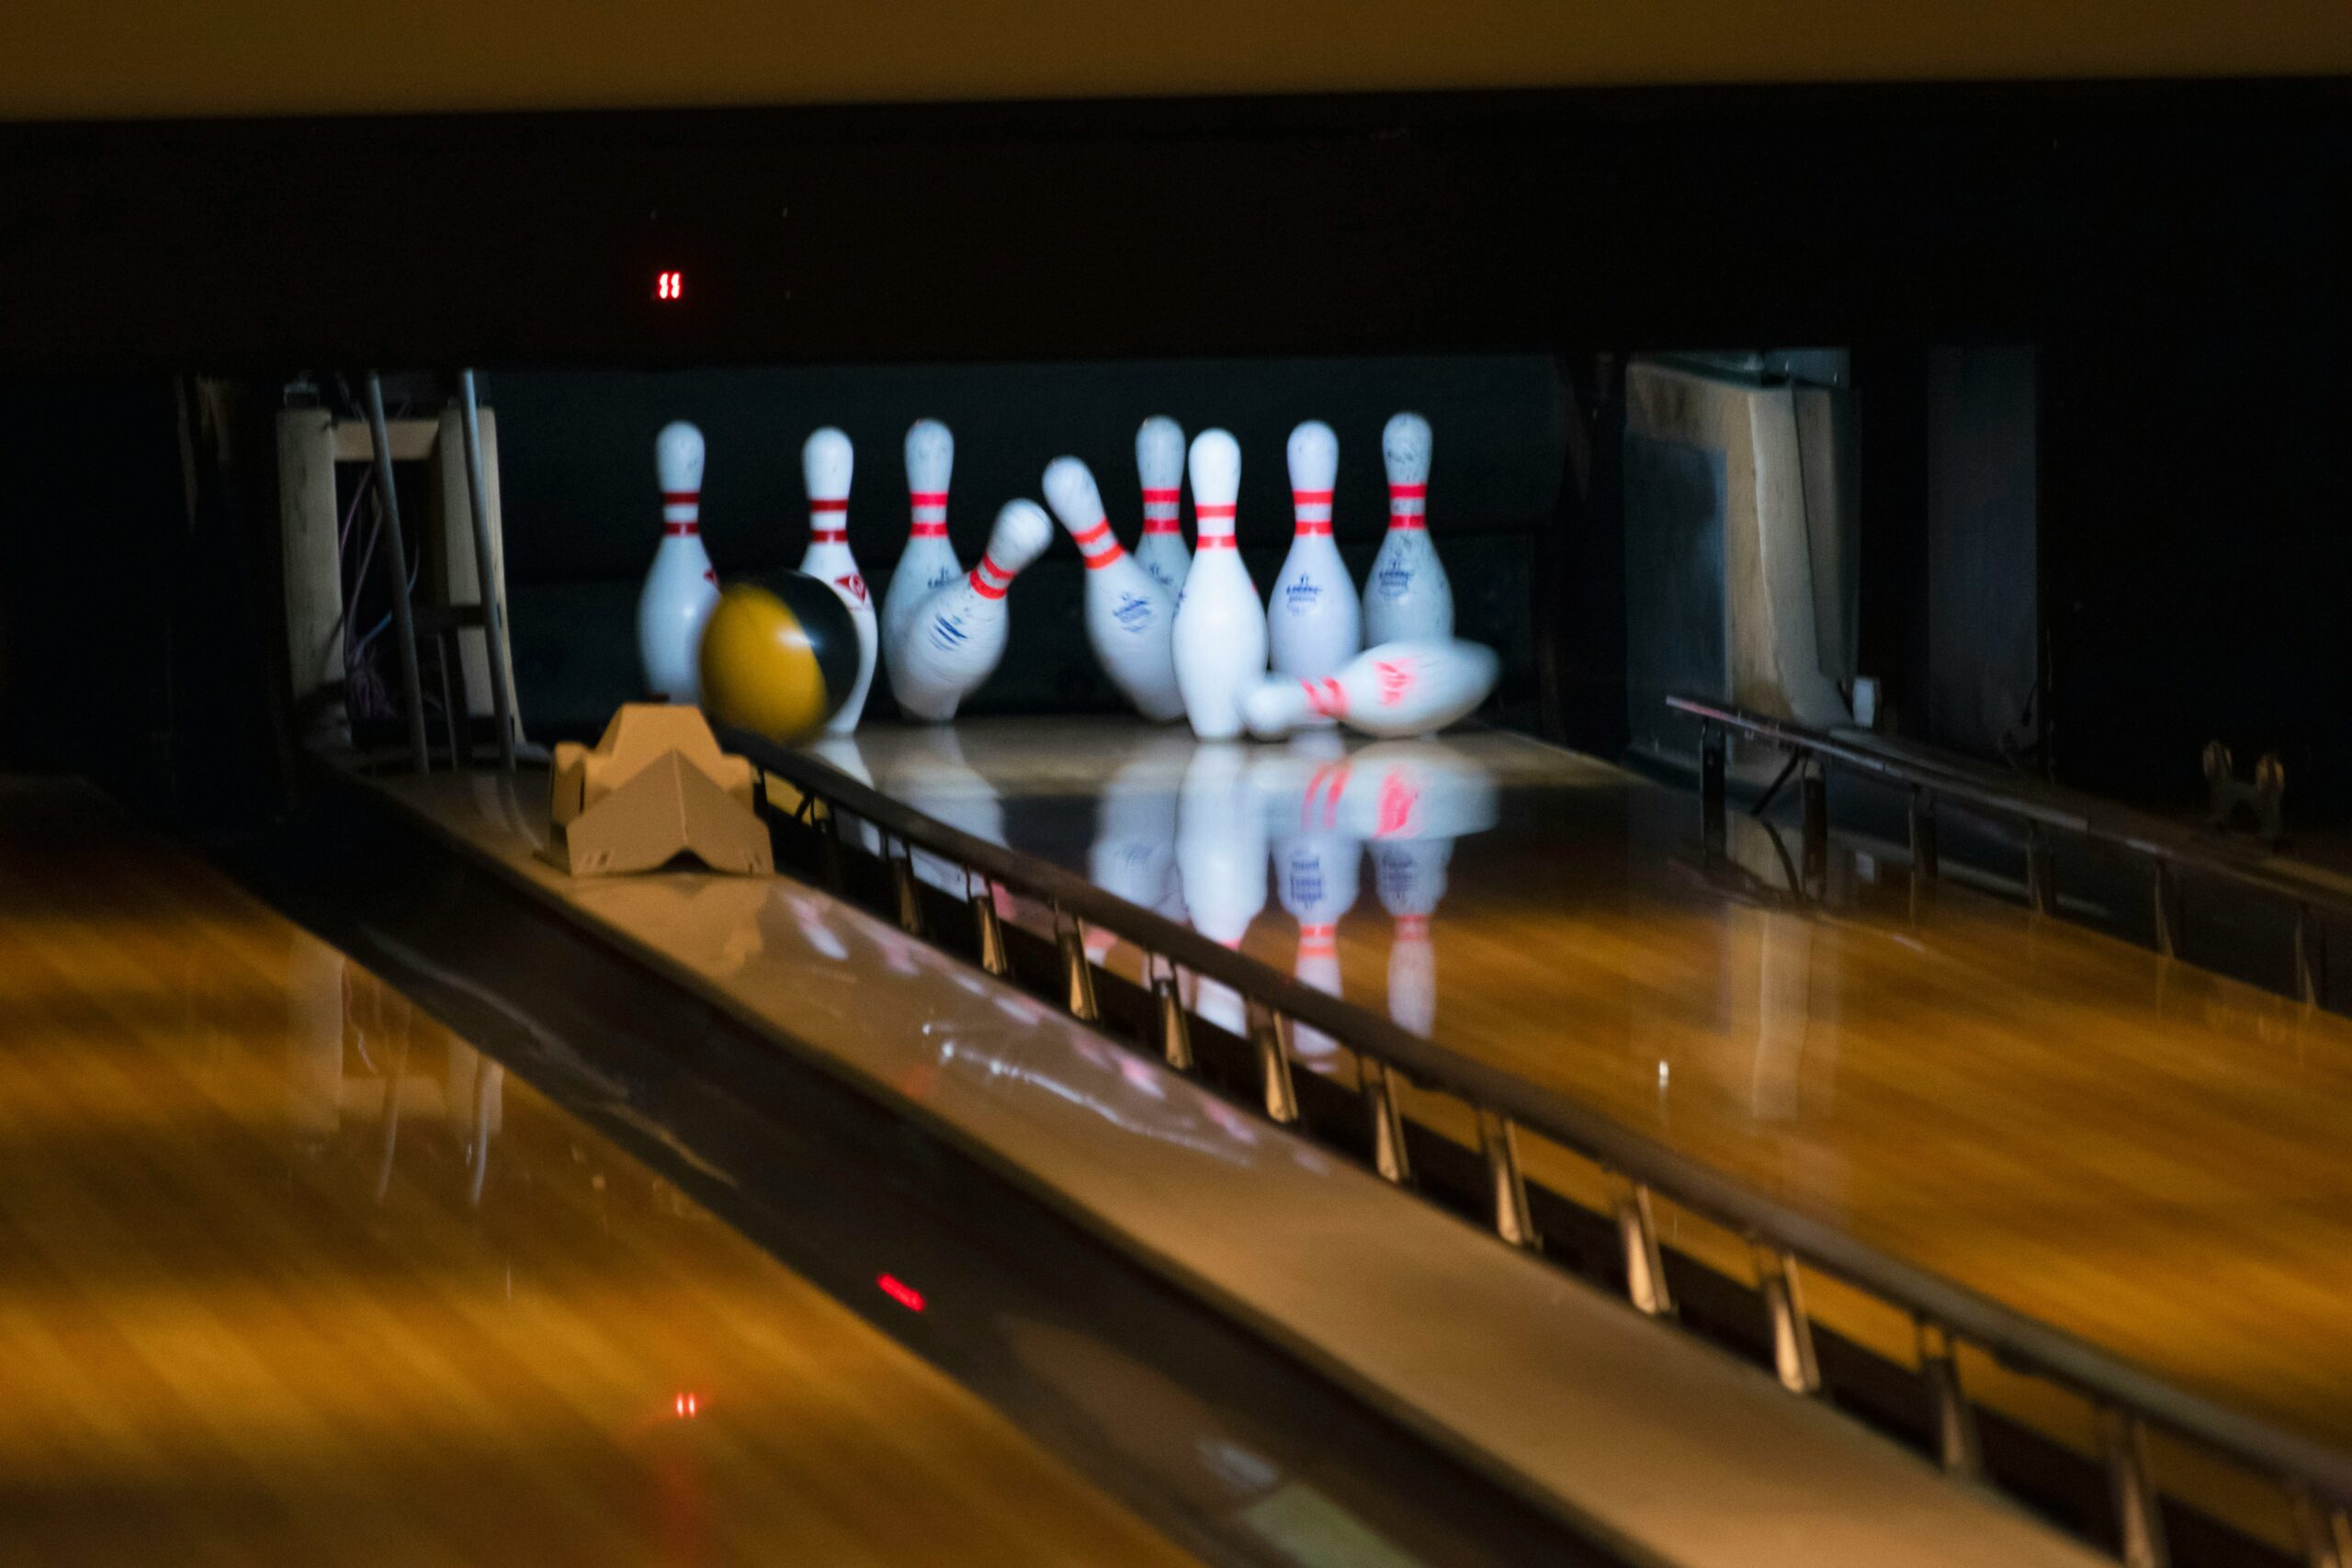 bowling pins being knocked over